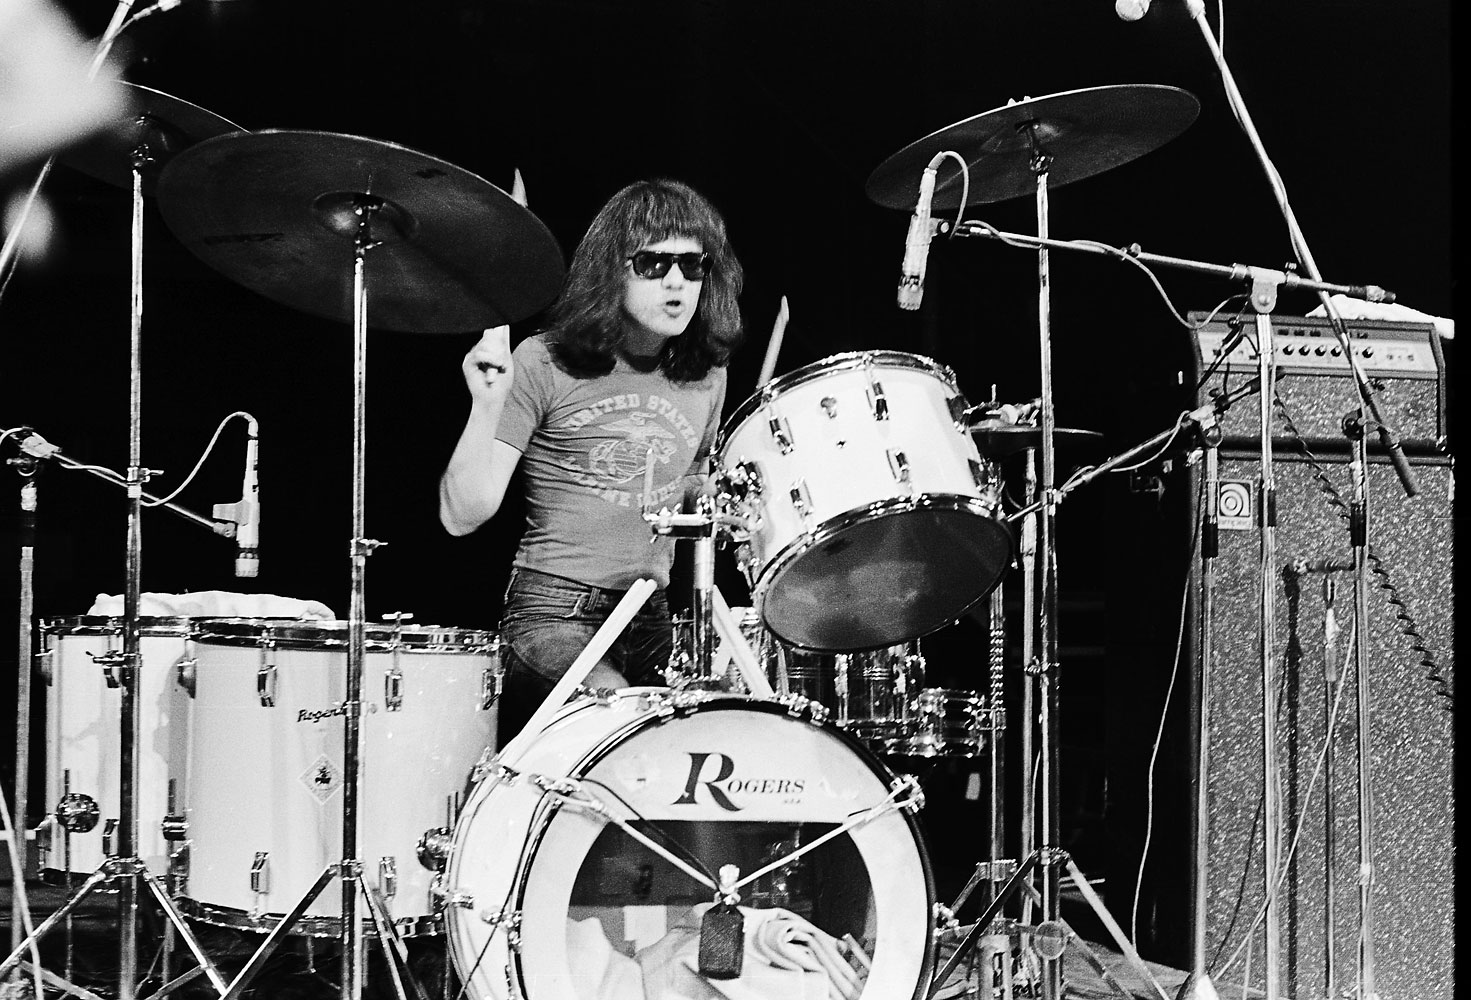 Tommy Ramone performs on stage with The Ramones at The Roundhouse in London, July 4th, 1976. (Gus Stewart—Redferns/Getty Images)